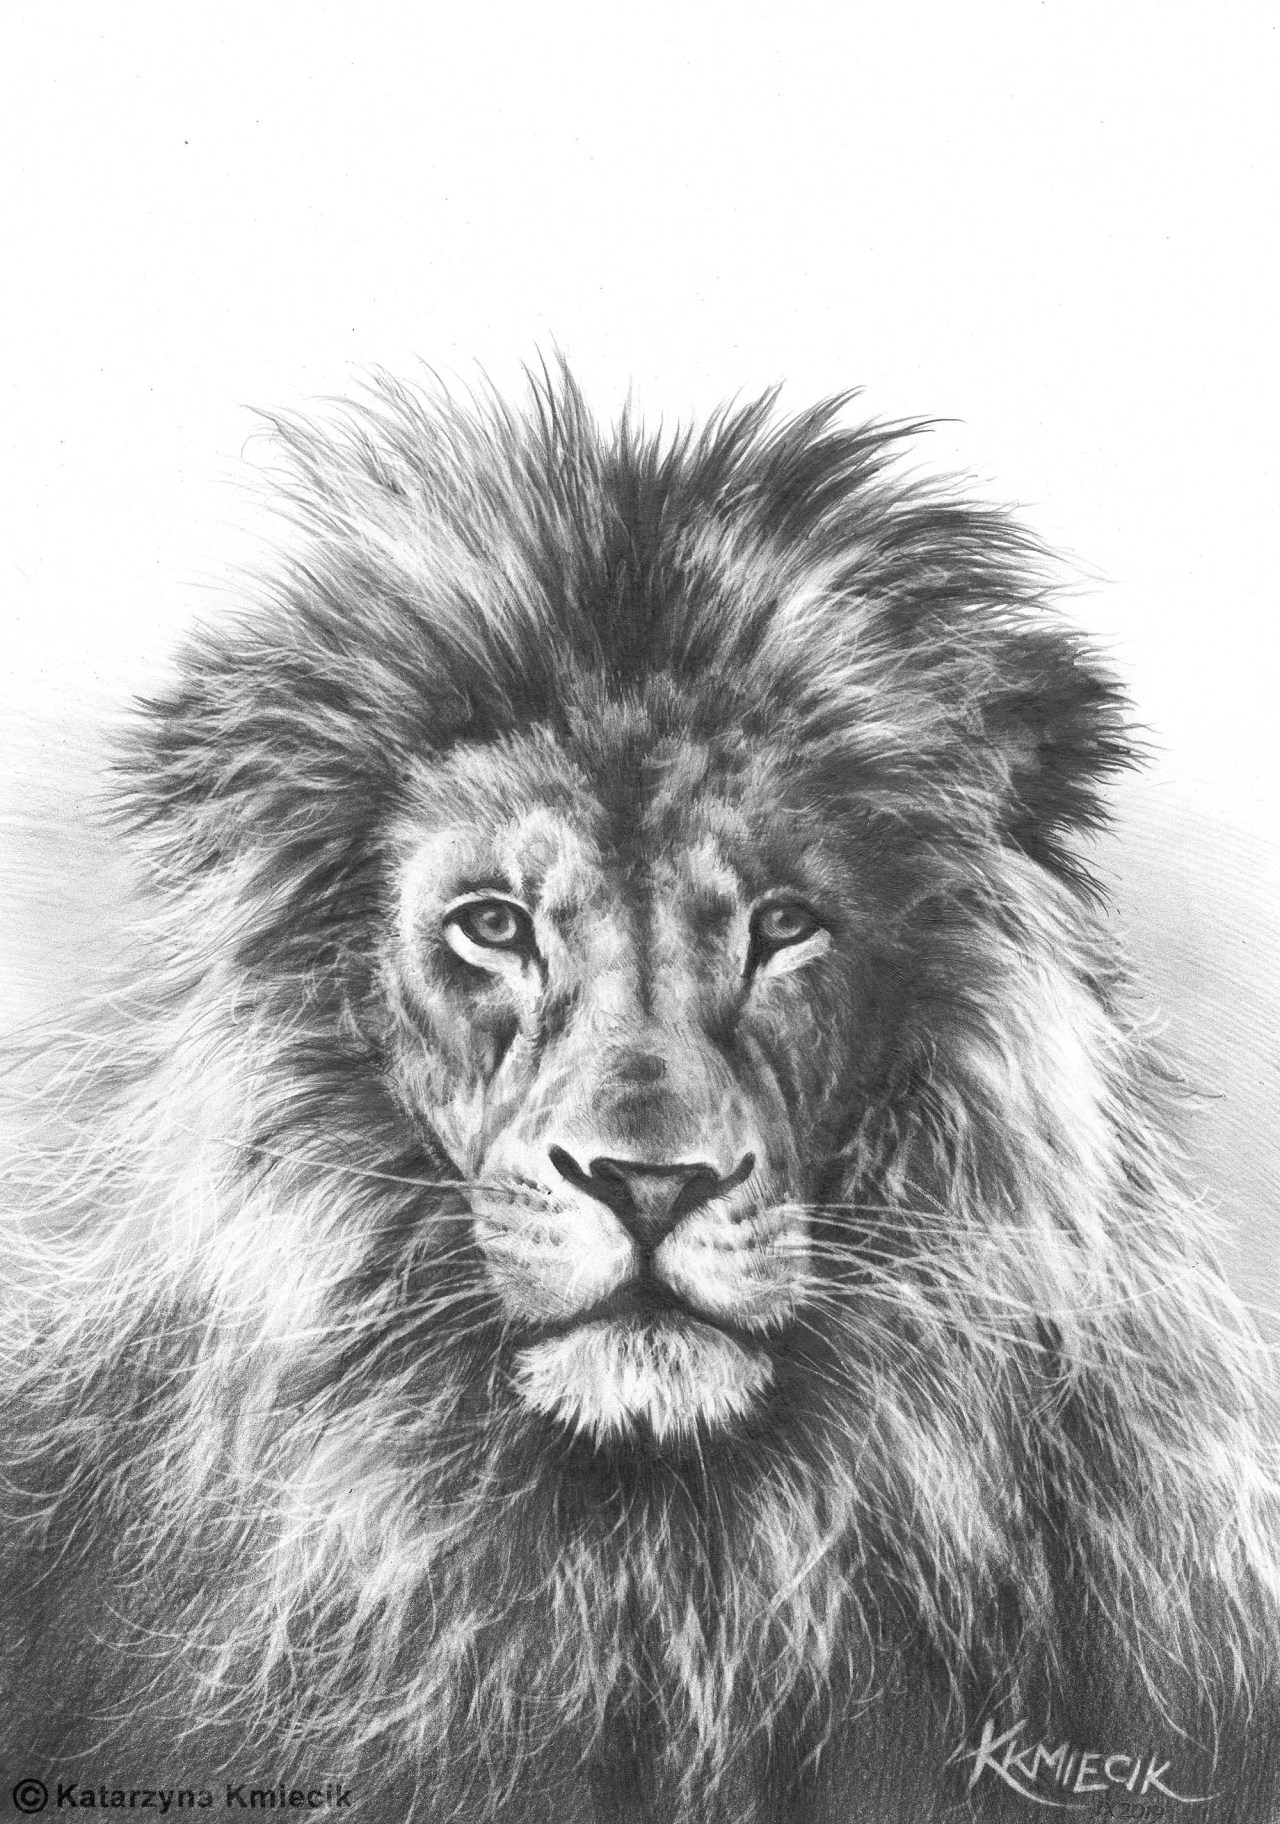 I've made this pencil drawing of a lion as a... - KATARZYNA KMIECIK